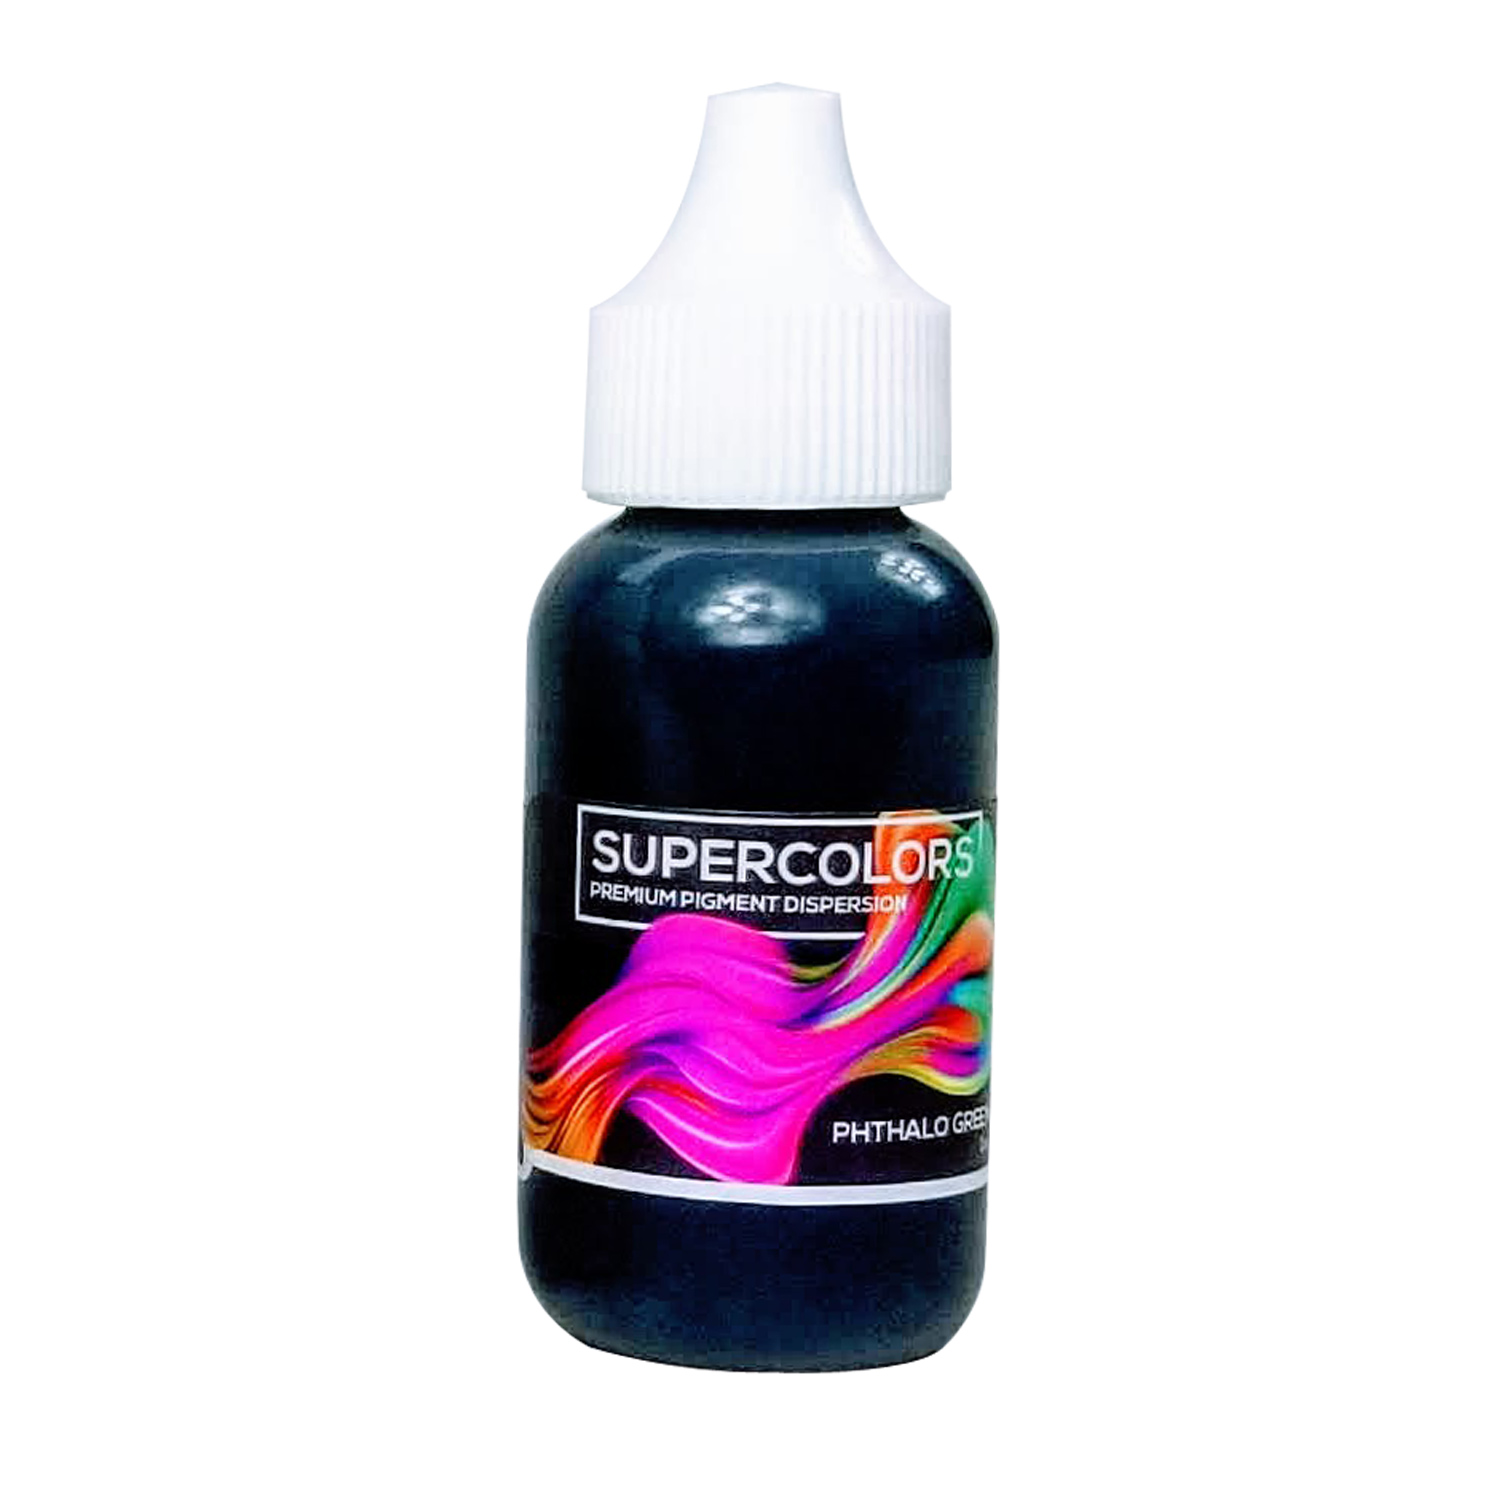 Epoxy Resin Pigment - 15 Color Liquid Epoxy Resin Dye - Highly Concentrated  E